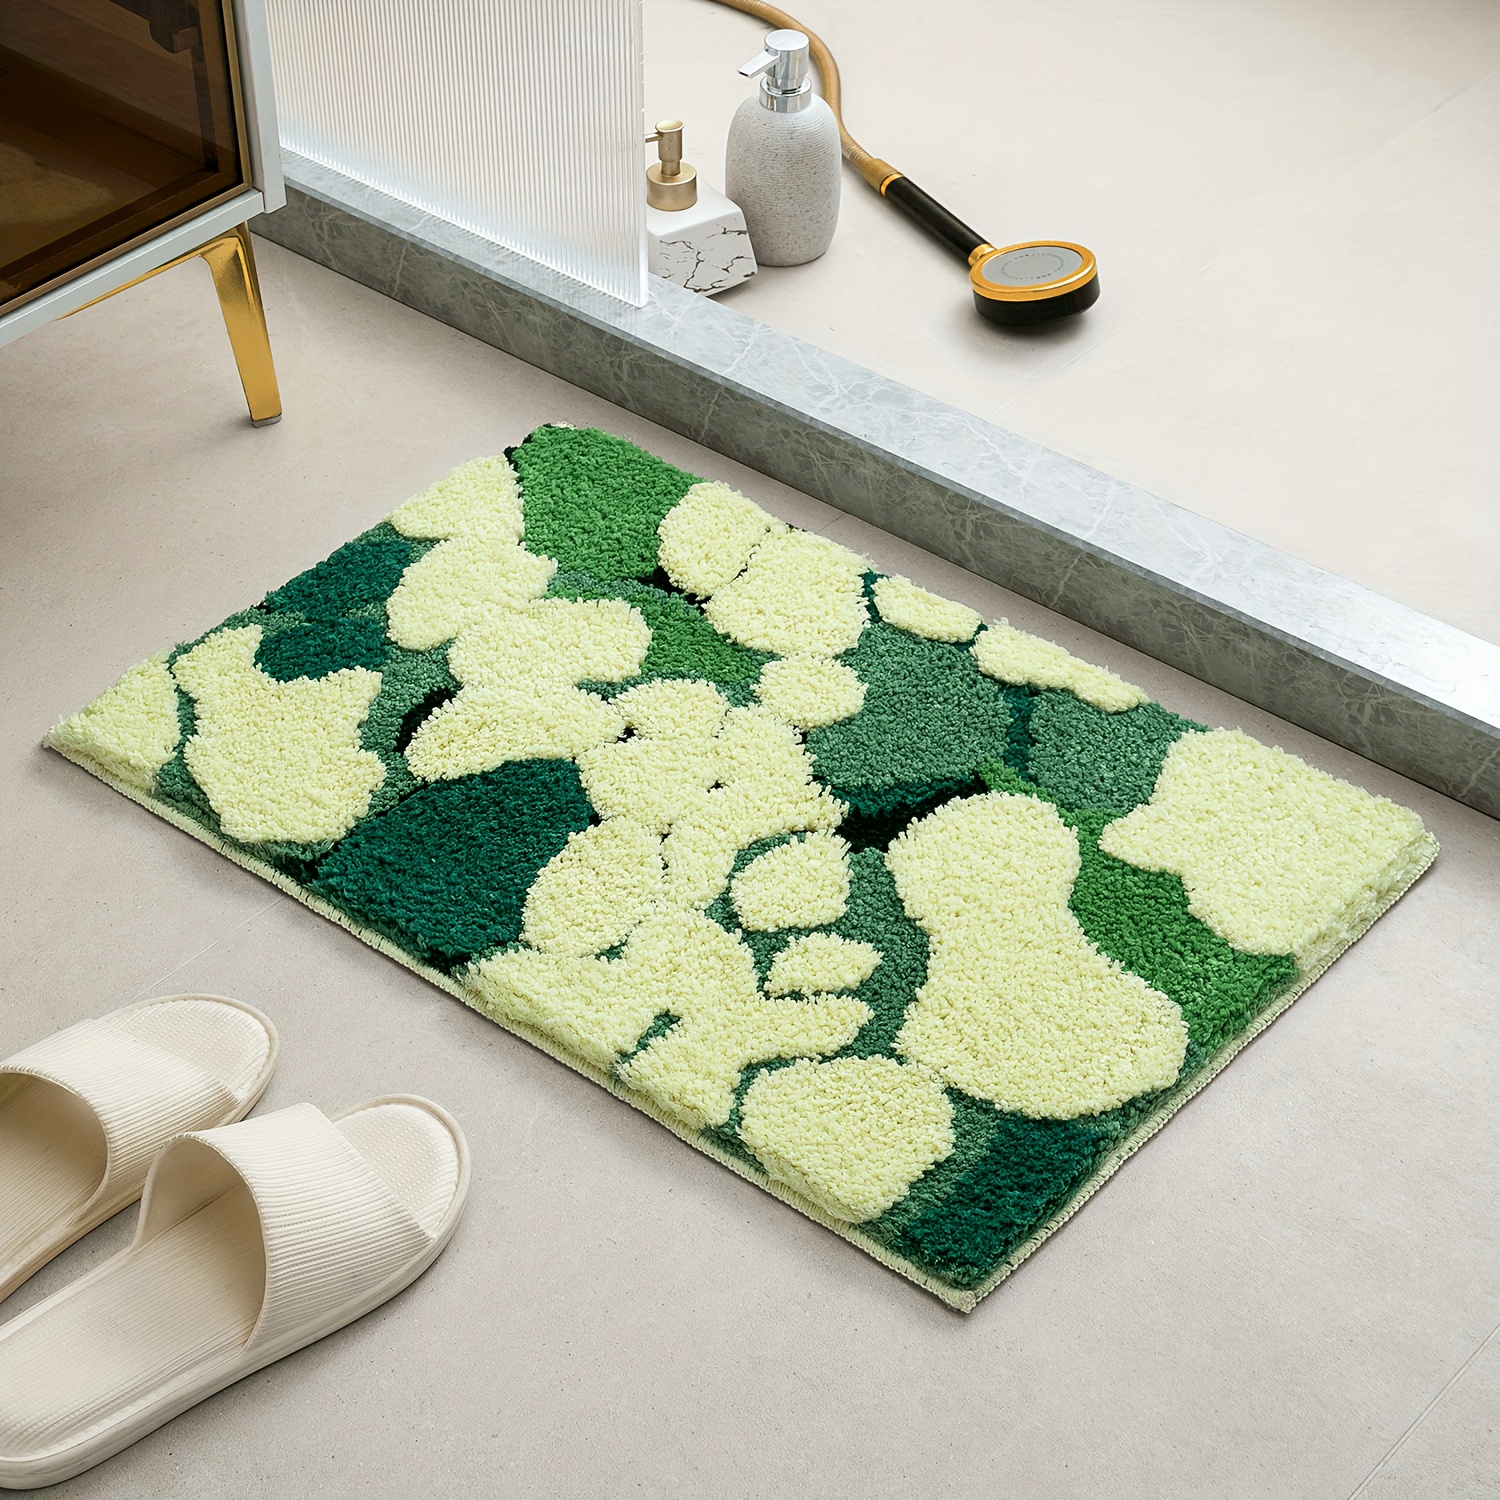 3d Plush Green Plant Printed Bedside Mat With Long Pile, Anti-slip Bathroom Rug  Small Carpet For Bedroom, Living Room Floor Decoration